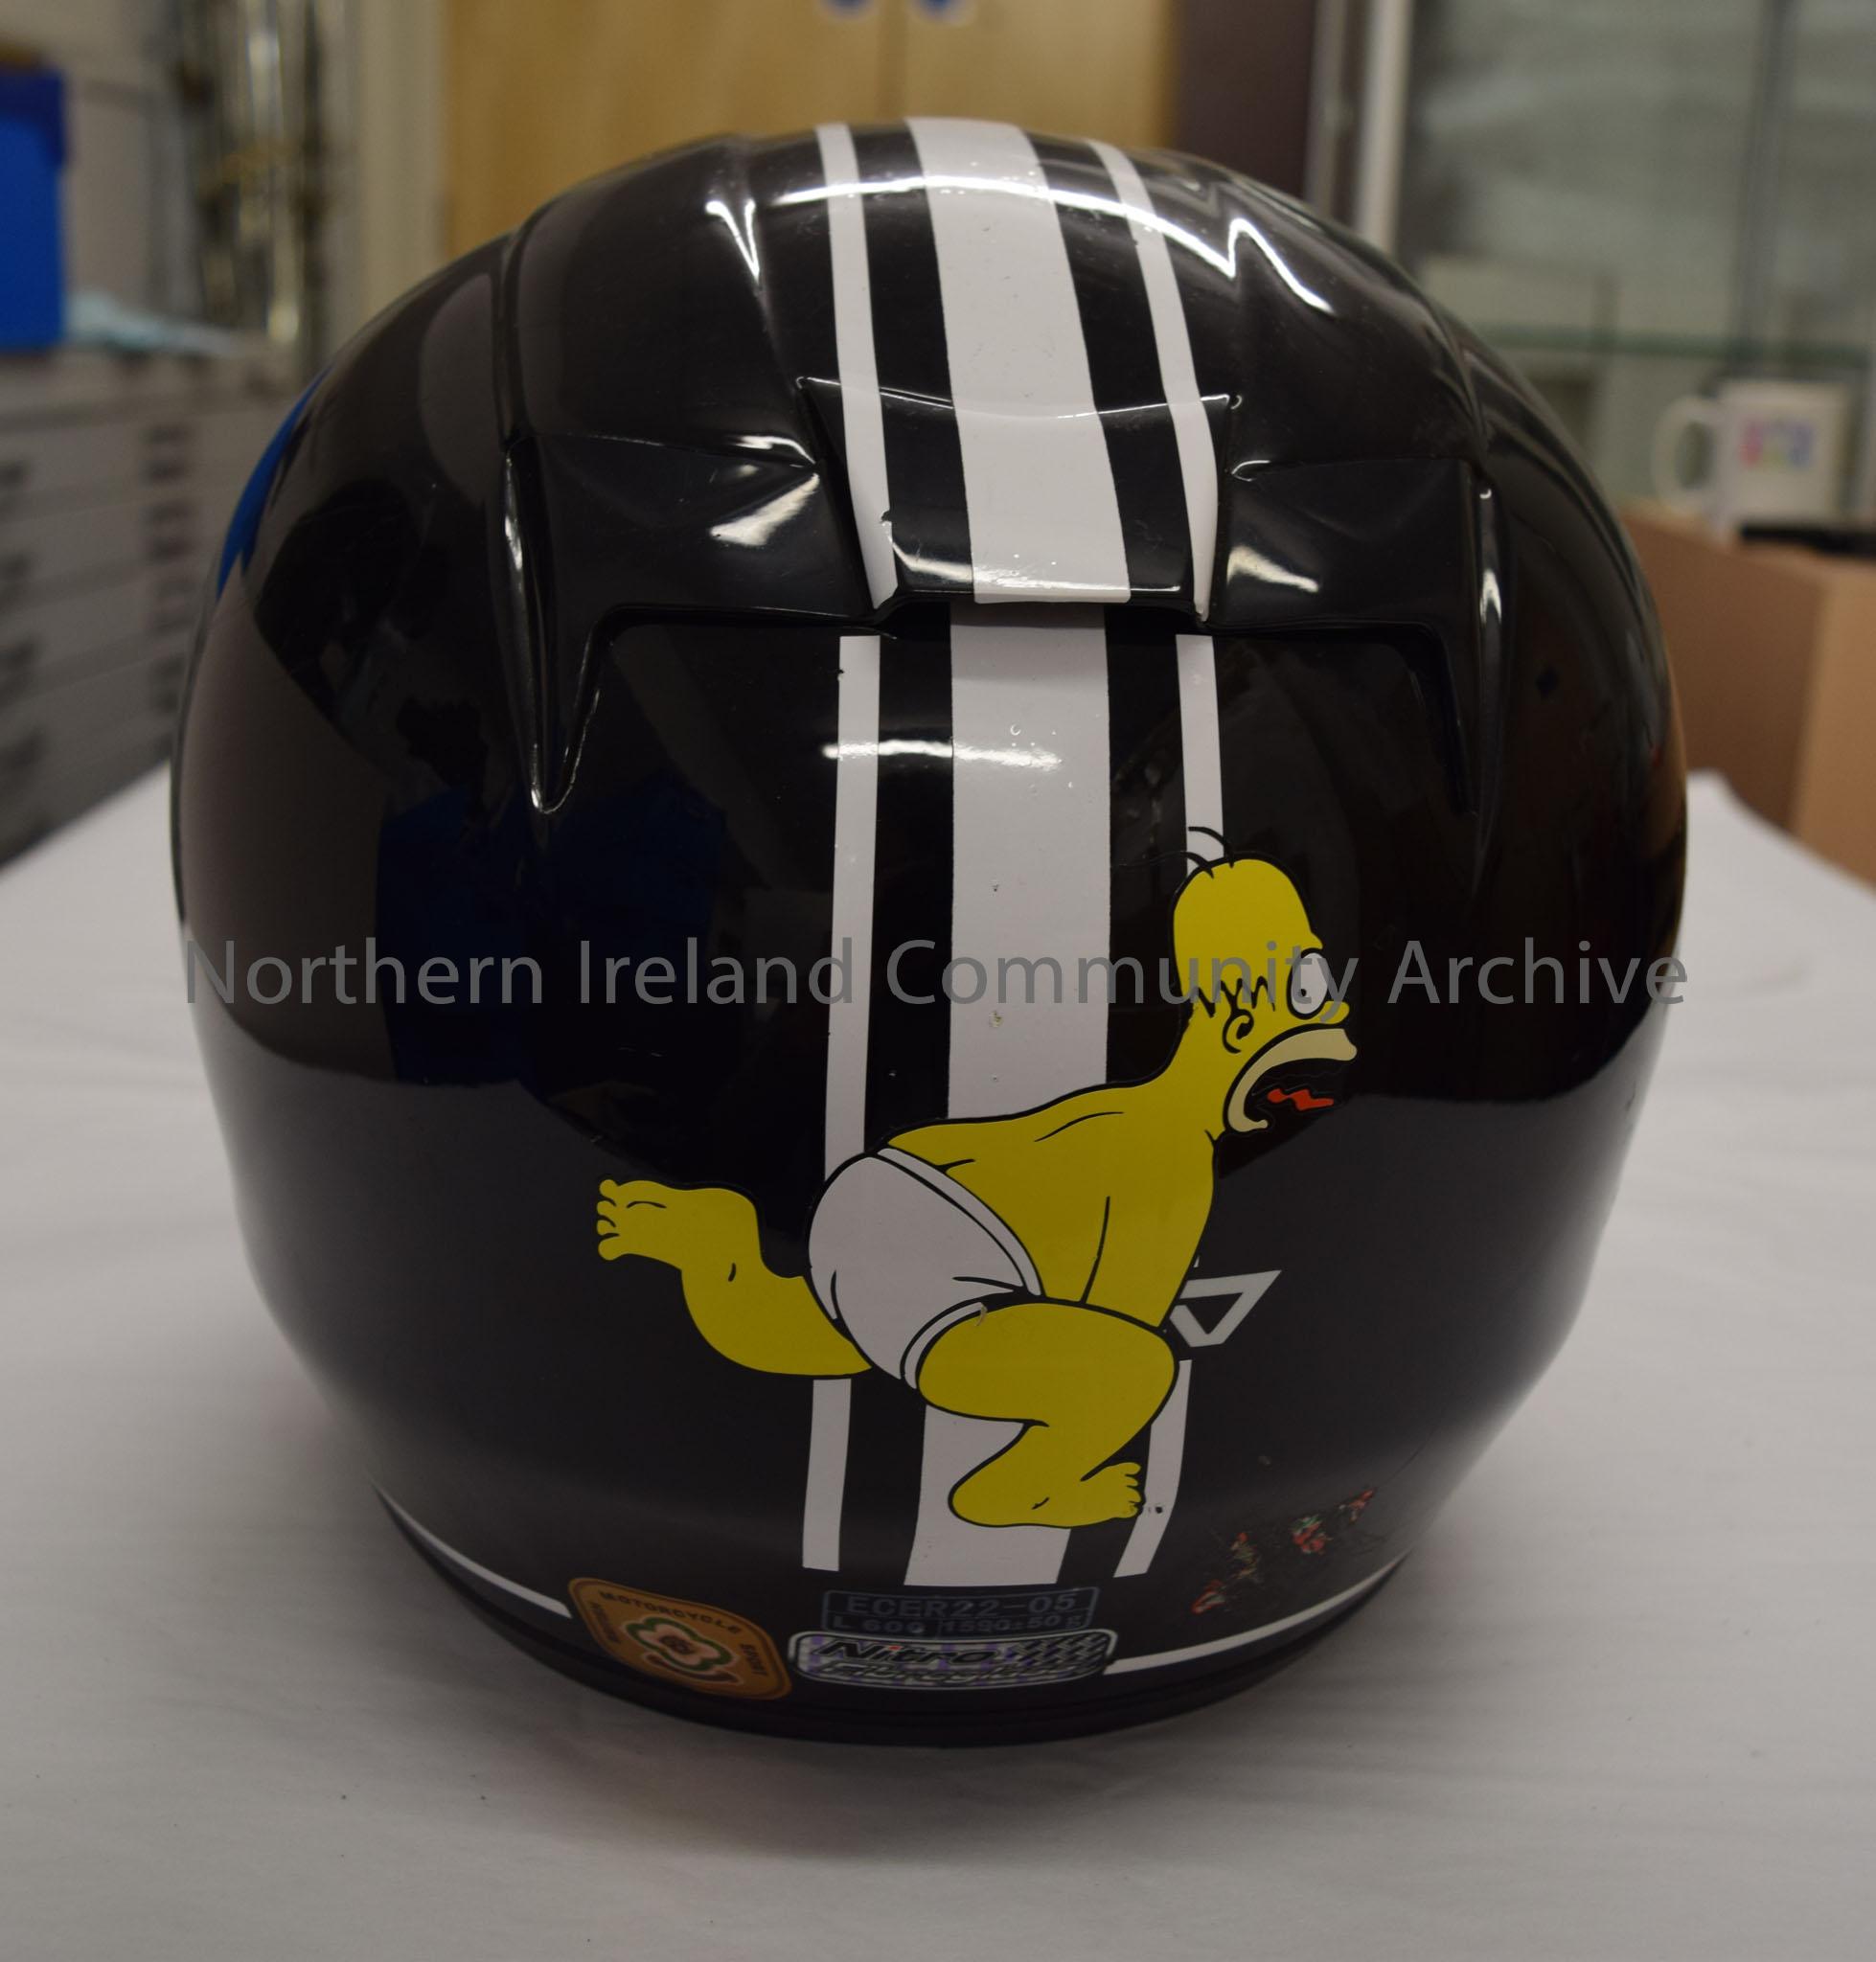 Nitro Racing motorcycle helmet belonging to Pete Simpson. Black with three white stripes down the middle and white trim. – 2016.8 (4)